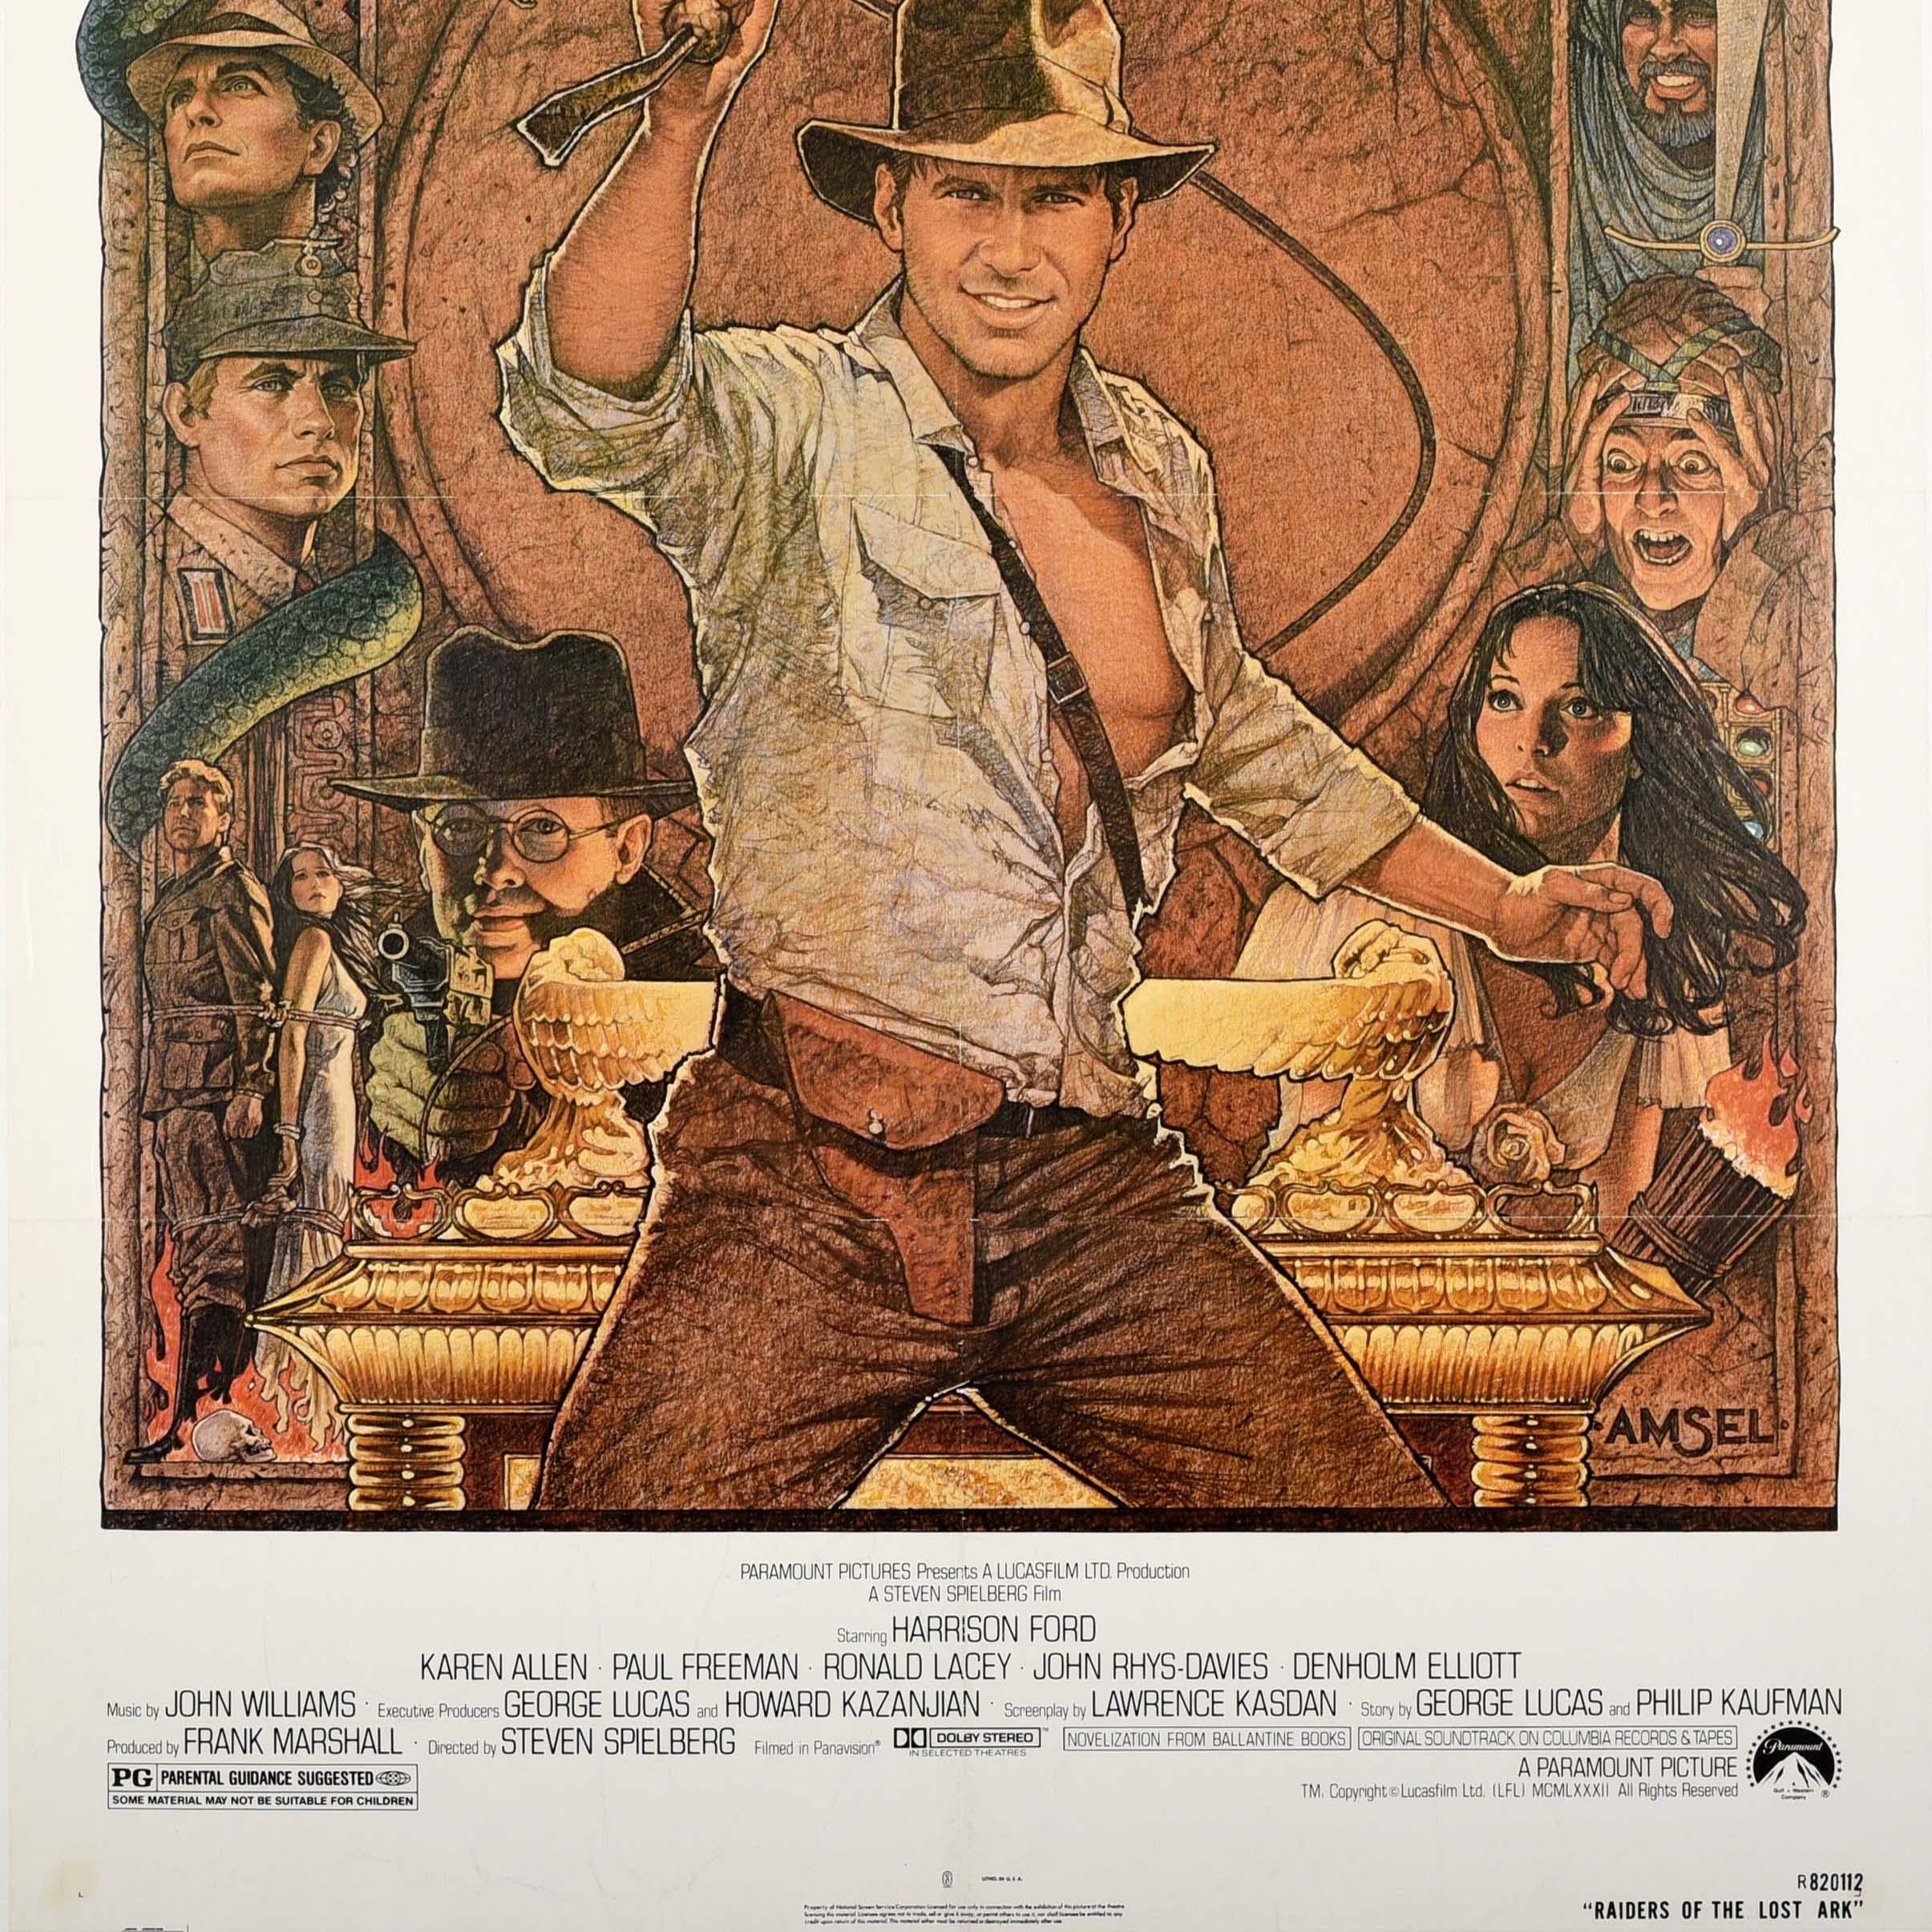 Original vintage movie poster for the re-release of one of the highest grossing films ever made Raiders of the Lost Ark starring Harrison Ford as the adventurous archaeologist Indiana Jones with Karen Allen as Marion, Paul Freeman, Ronald Lacey,